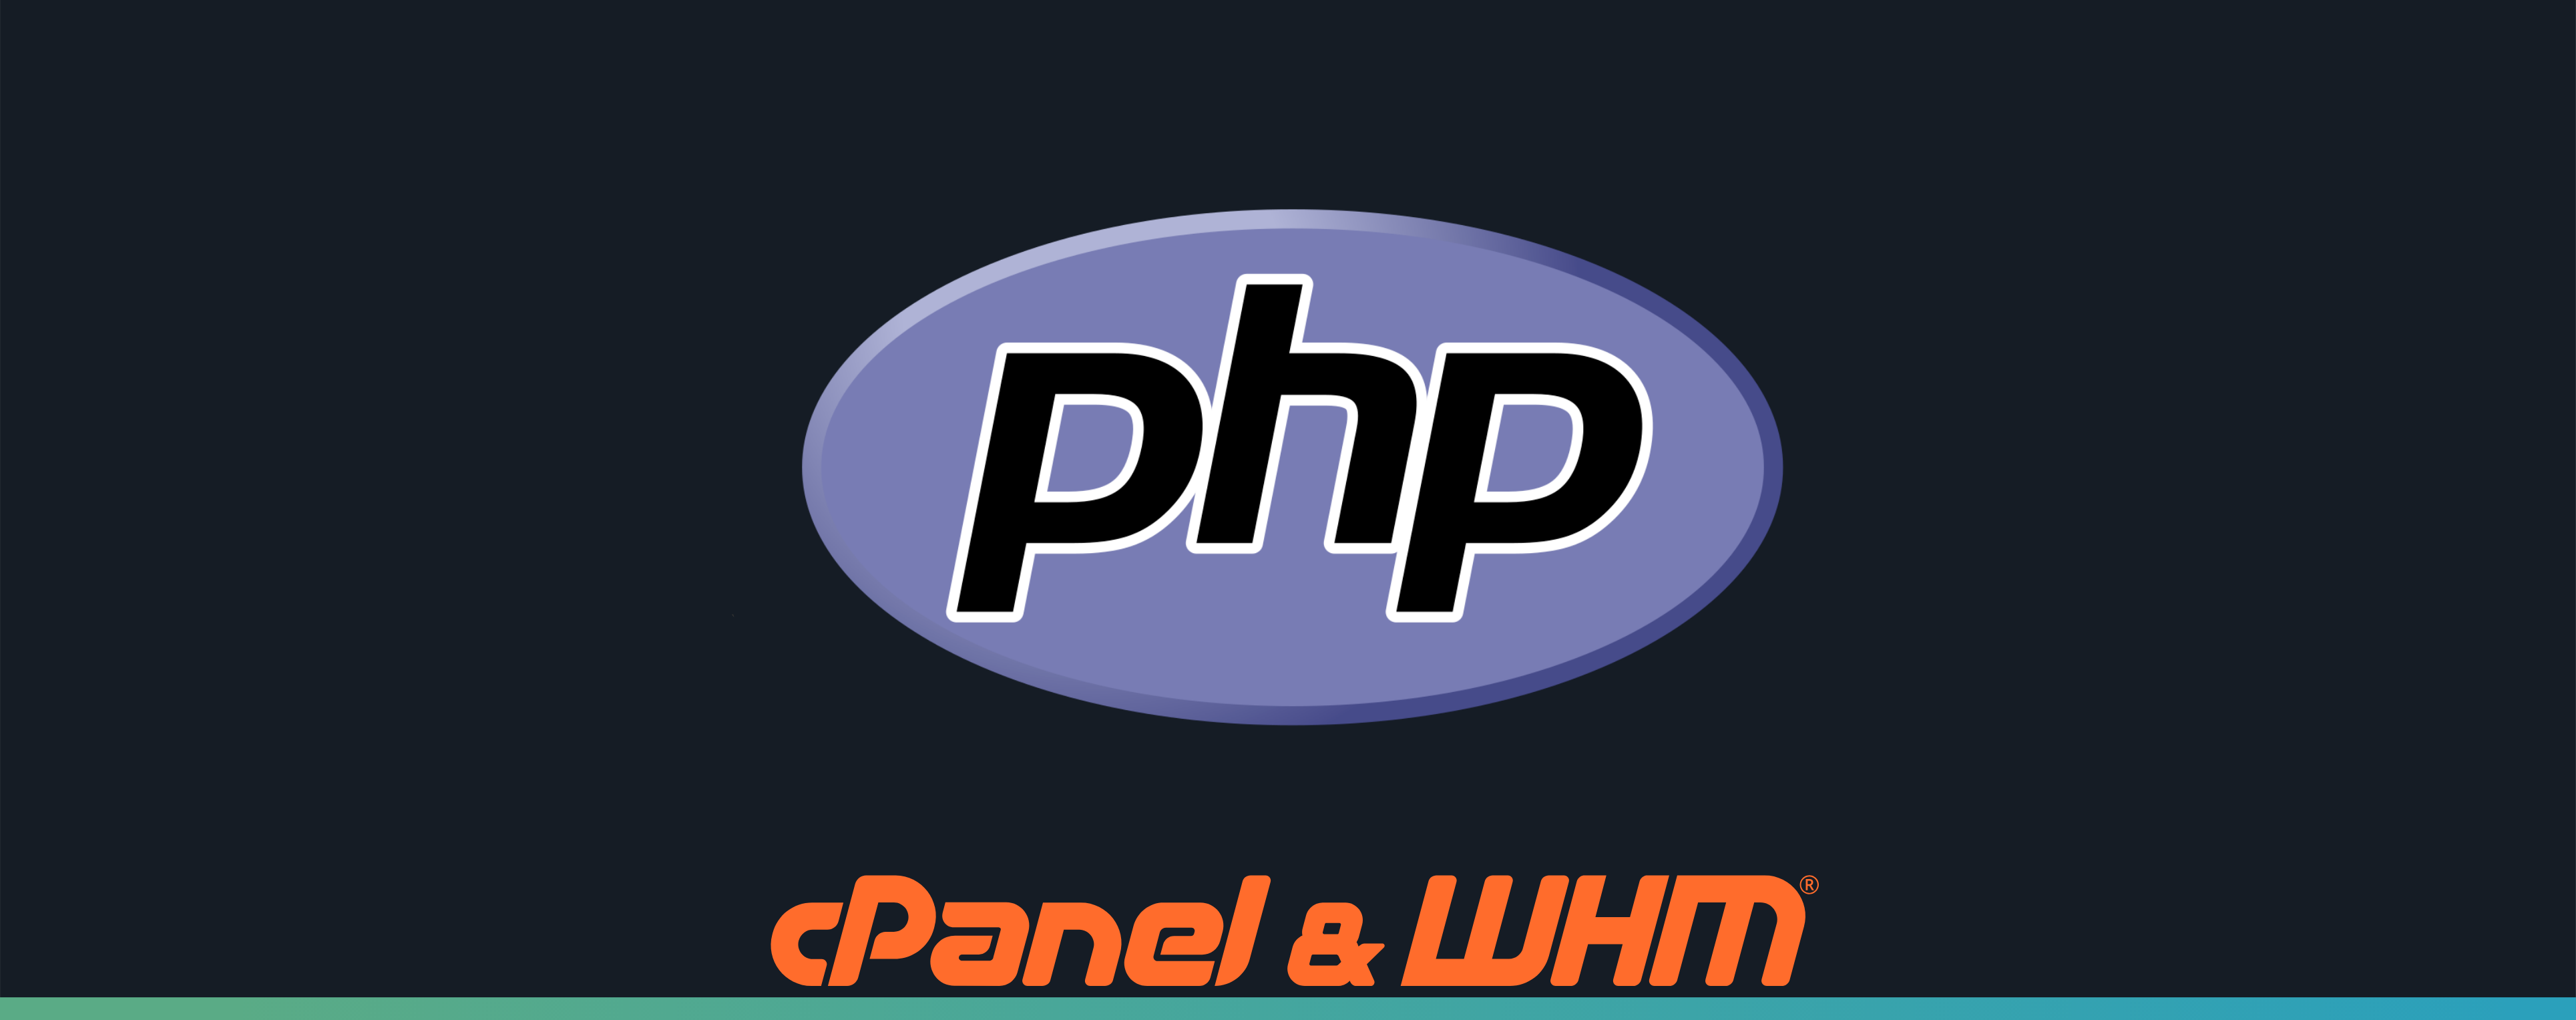 Removal of PHP 5.6 and PHP 7.0 in EasyApache Profiles